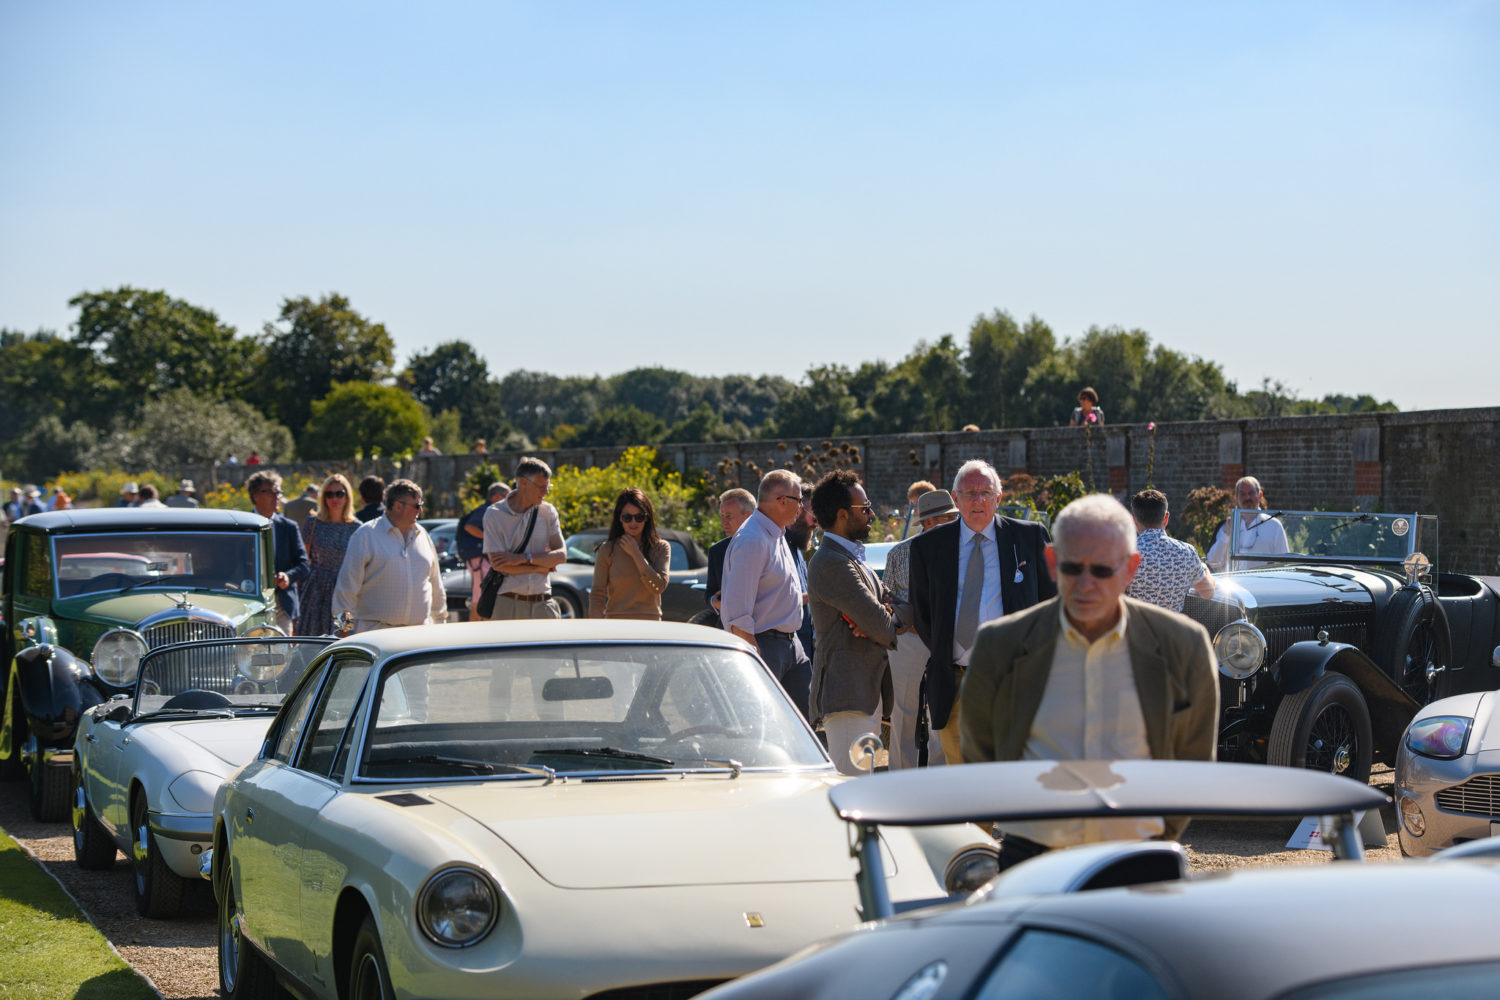 CONCOURS OF ELEGANCE WINS CONCOURS OF THE YEAR AWARD AT THE HISTORIC MOTORING AWARDS